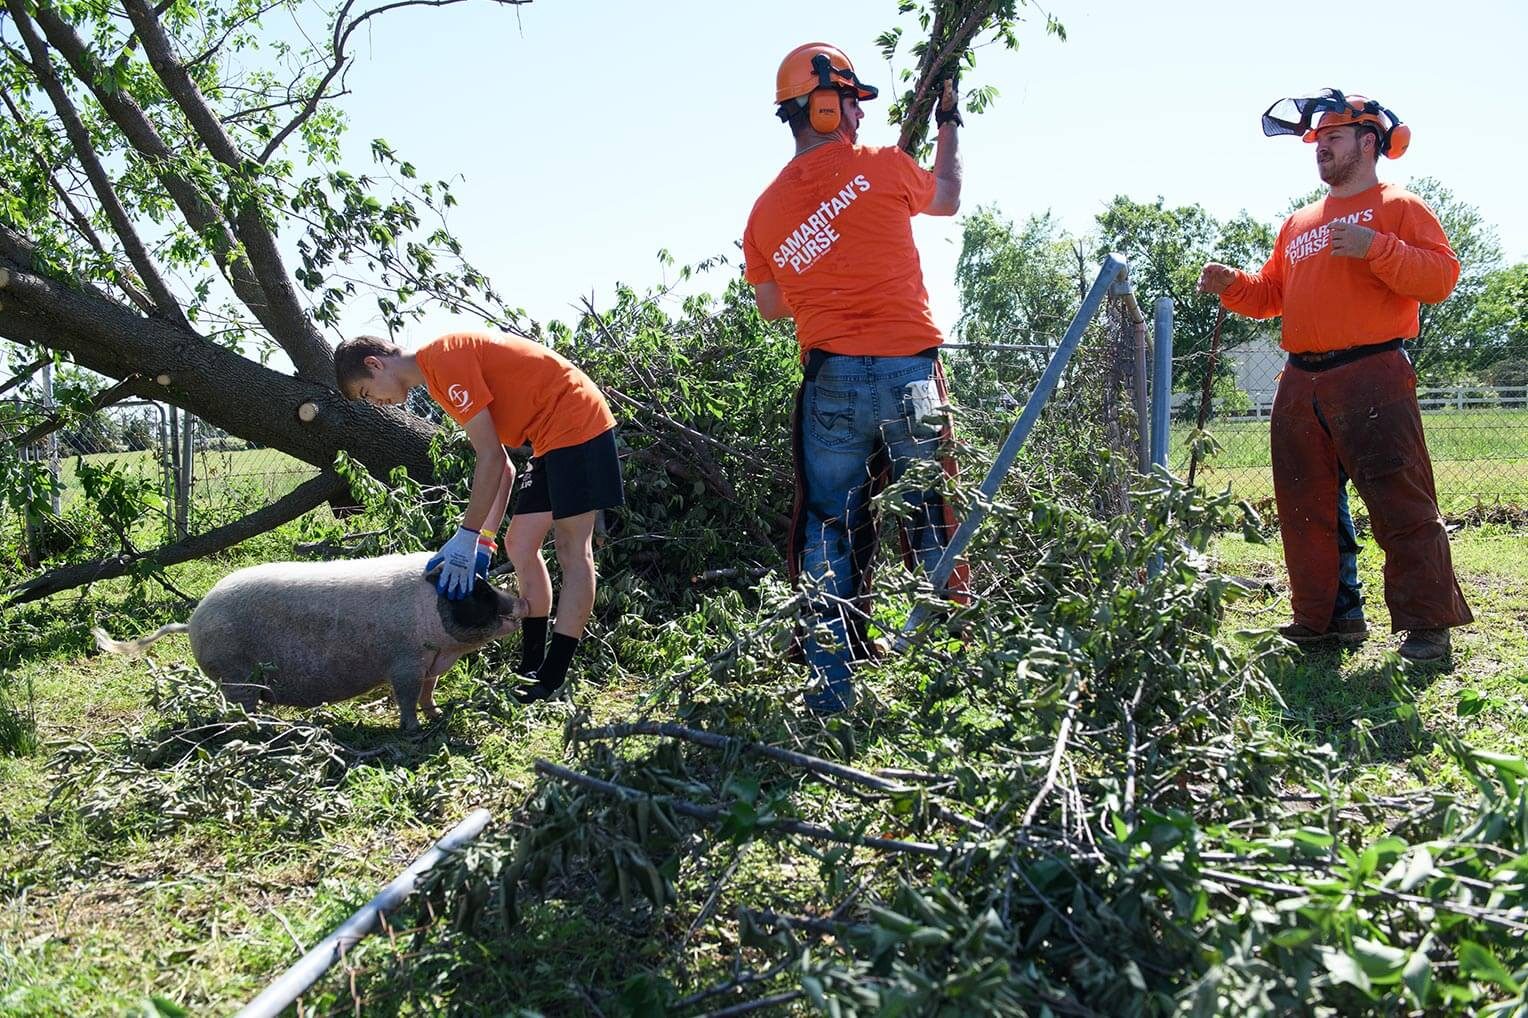 Among many things, Samaritan's Purse volunteers remove fallen trees from homeowners' properties.